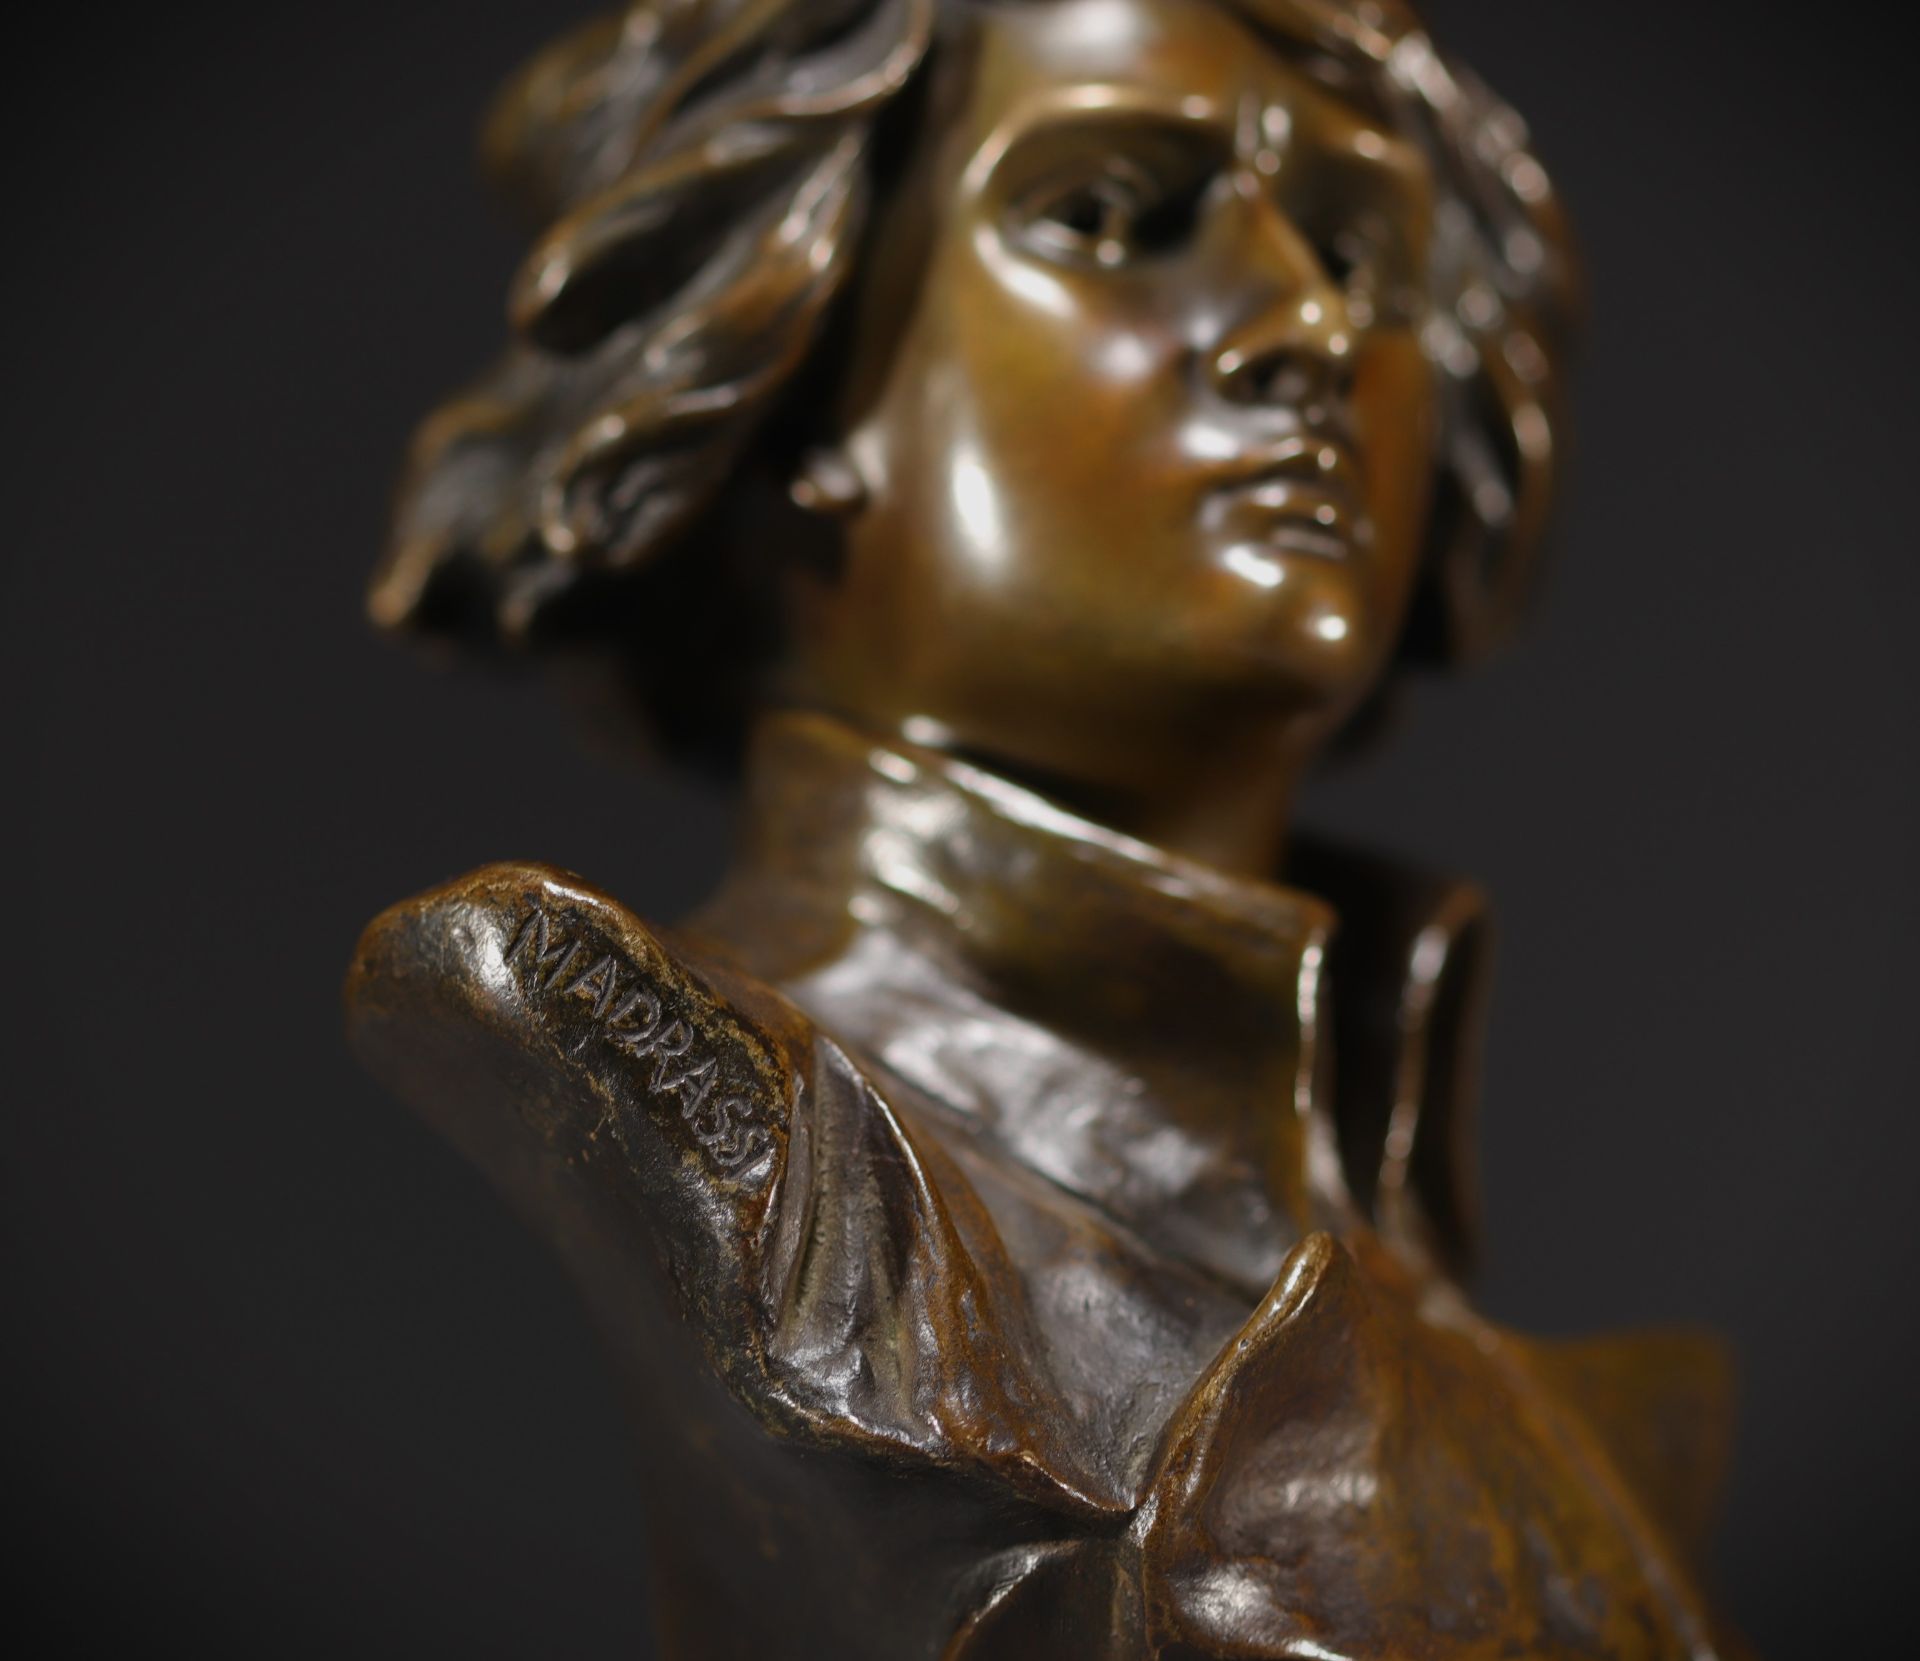 Lucas MADRASSI (1848-1919) "Young Napoleon Bonaparte" Bust in bronze with brown patina. - Image 5 of 6